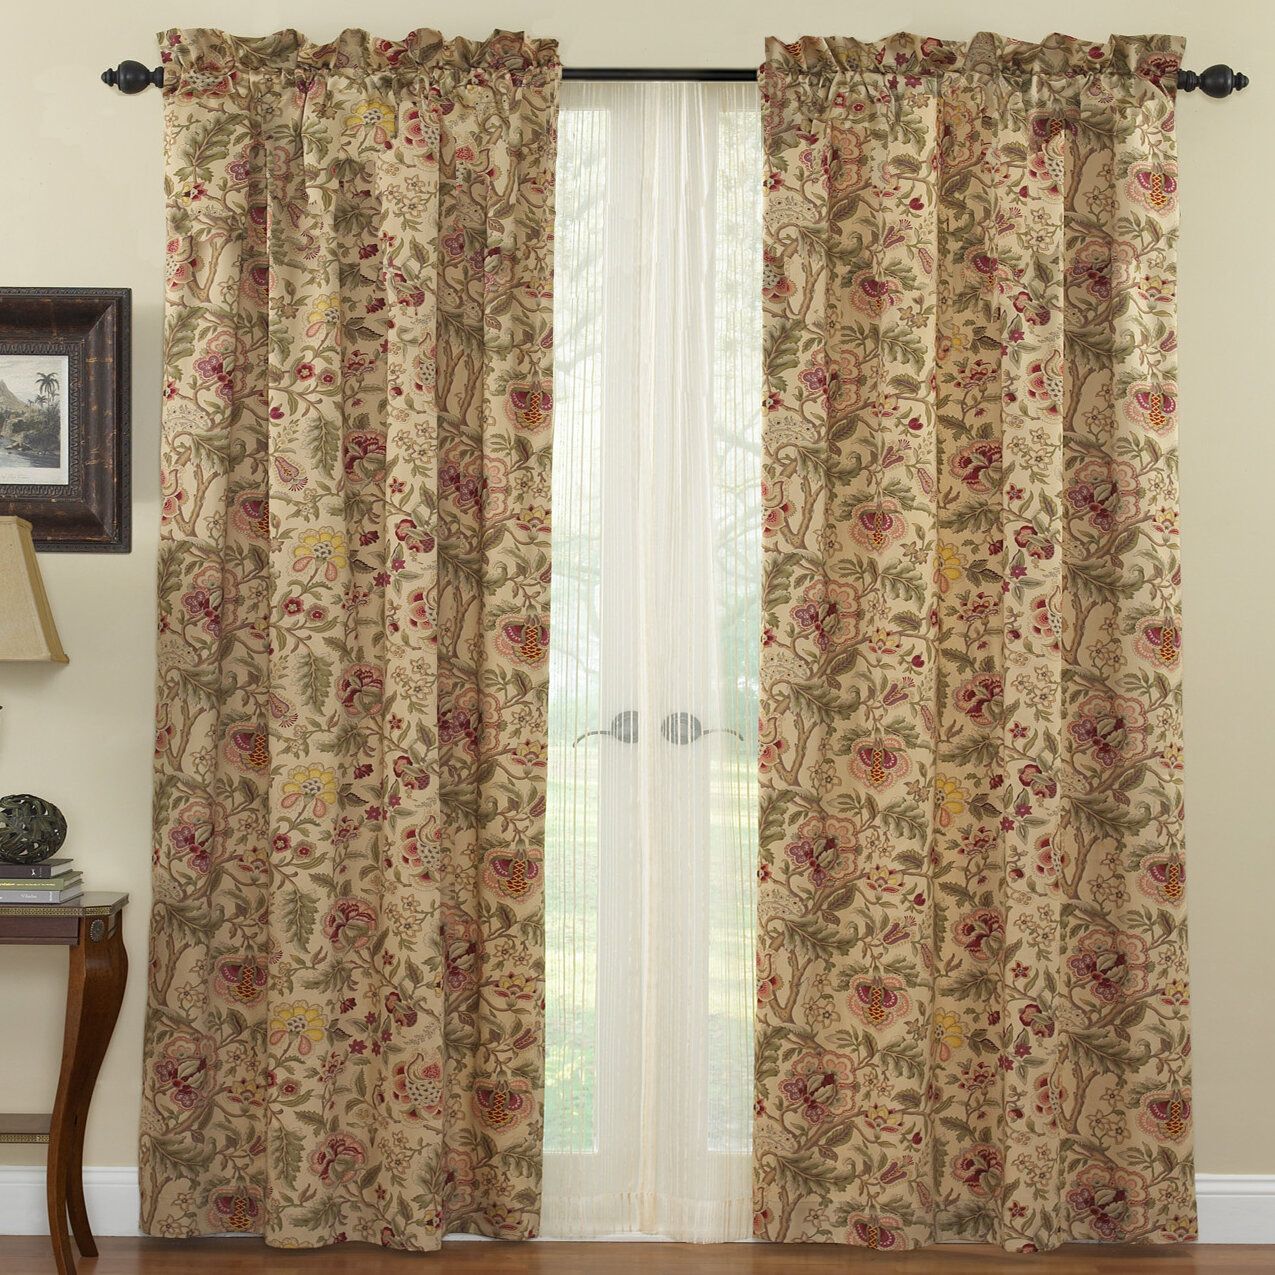 Waverly Imperial Dress Drapery Floral Room Darkening Rod Intended For Waverly Kensington Bloom Window Tier Pairs (View 19 of 20)